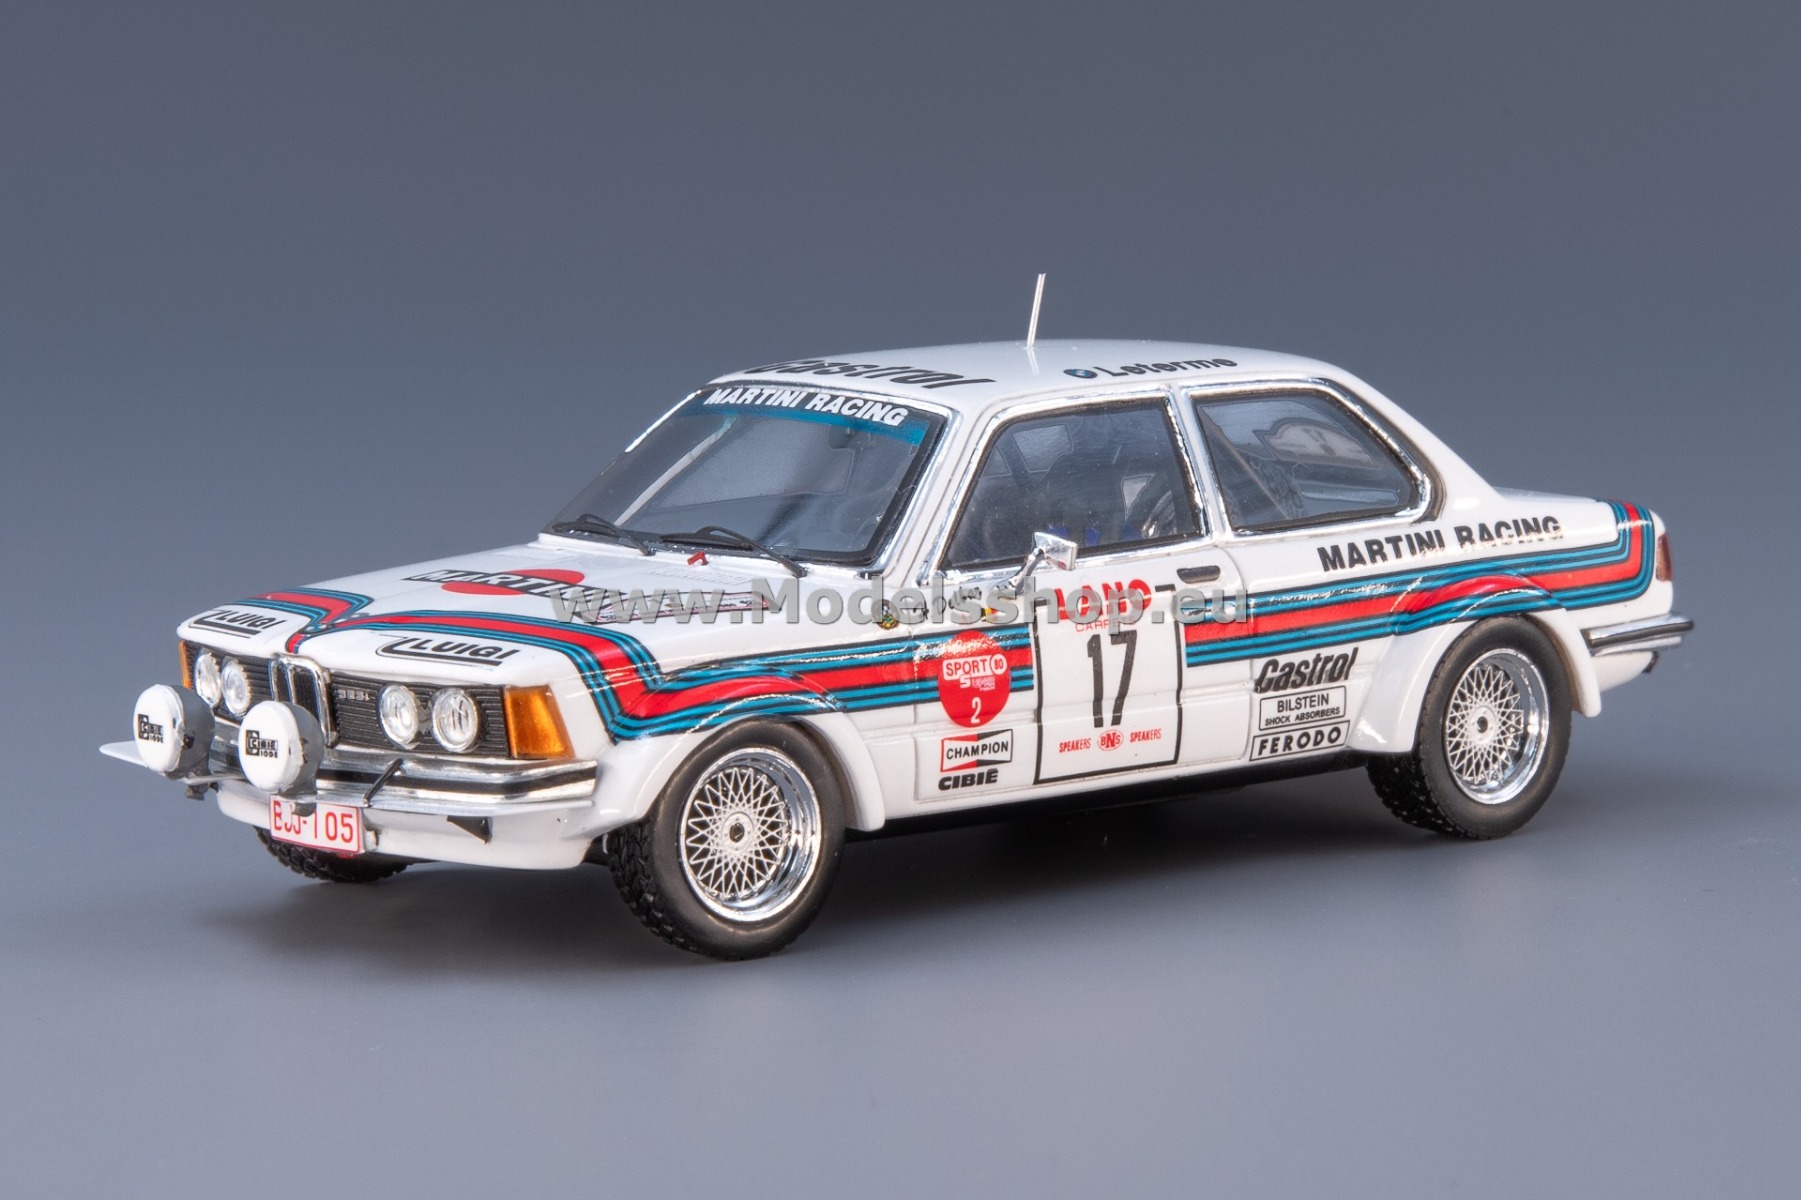 BMW 323 Gr 2 N0.17, Martini Racing, 24H Ypres Rally 1980, Hermes Delbar / Willy Lux